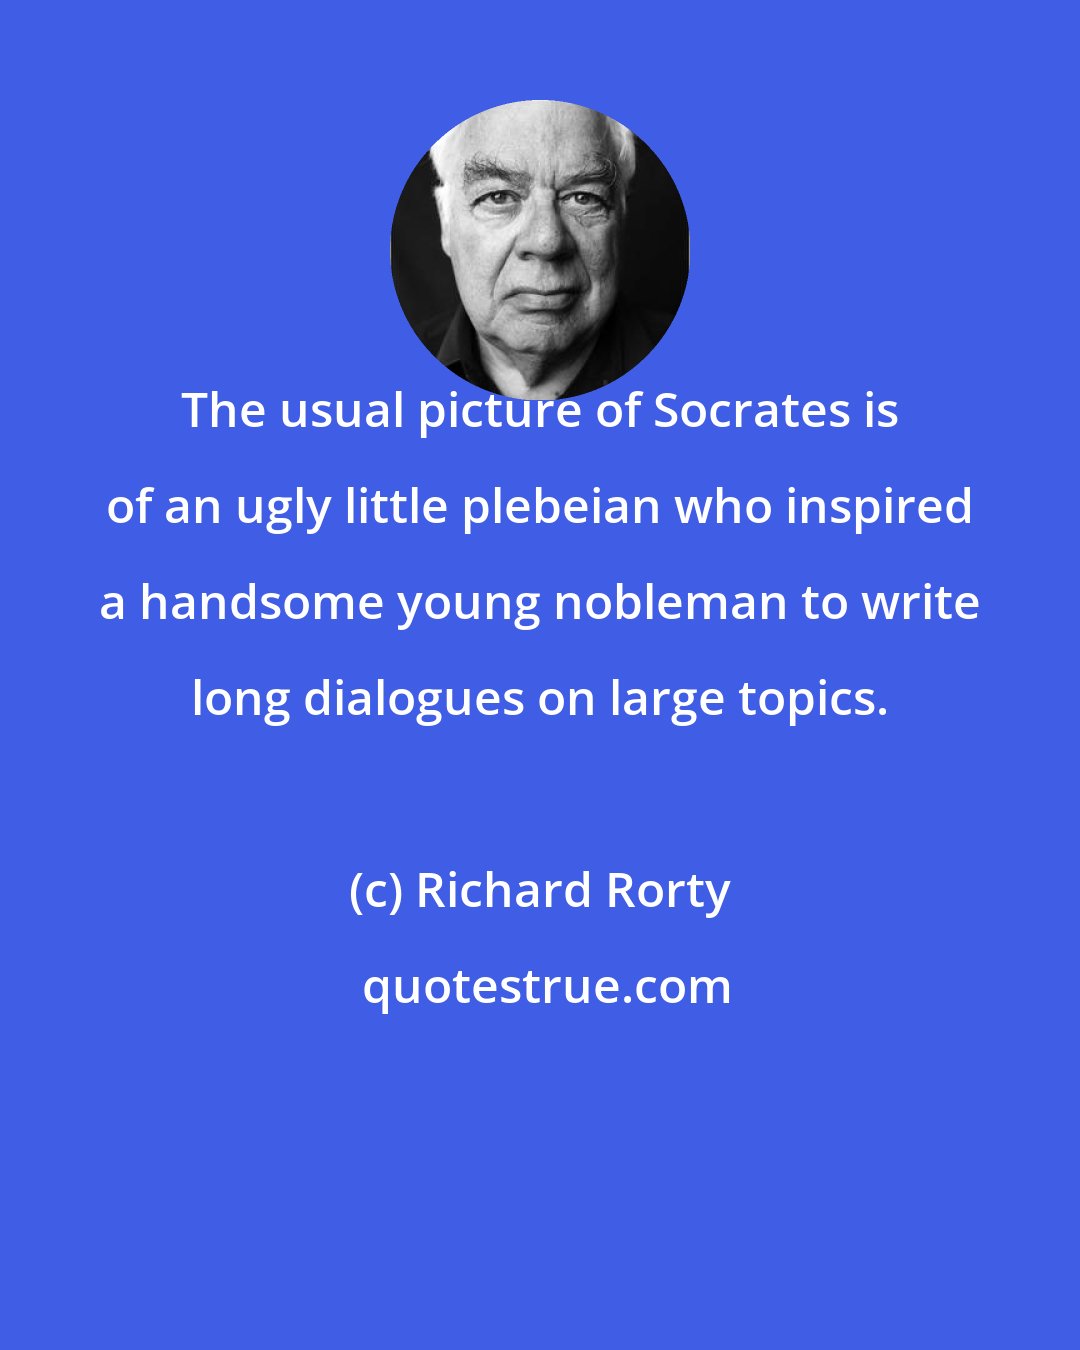 Richard Rorty: The usual picture of Socrates is of an ugly little plebeian who inspired a handsome young nobleman to write long dialogues on large topics.